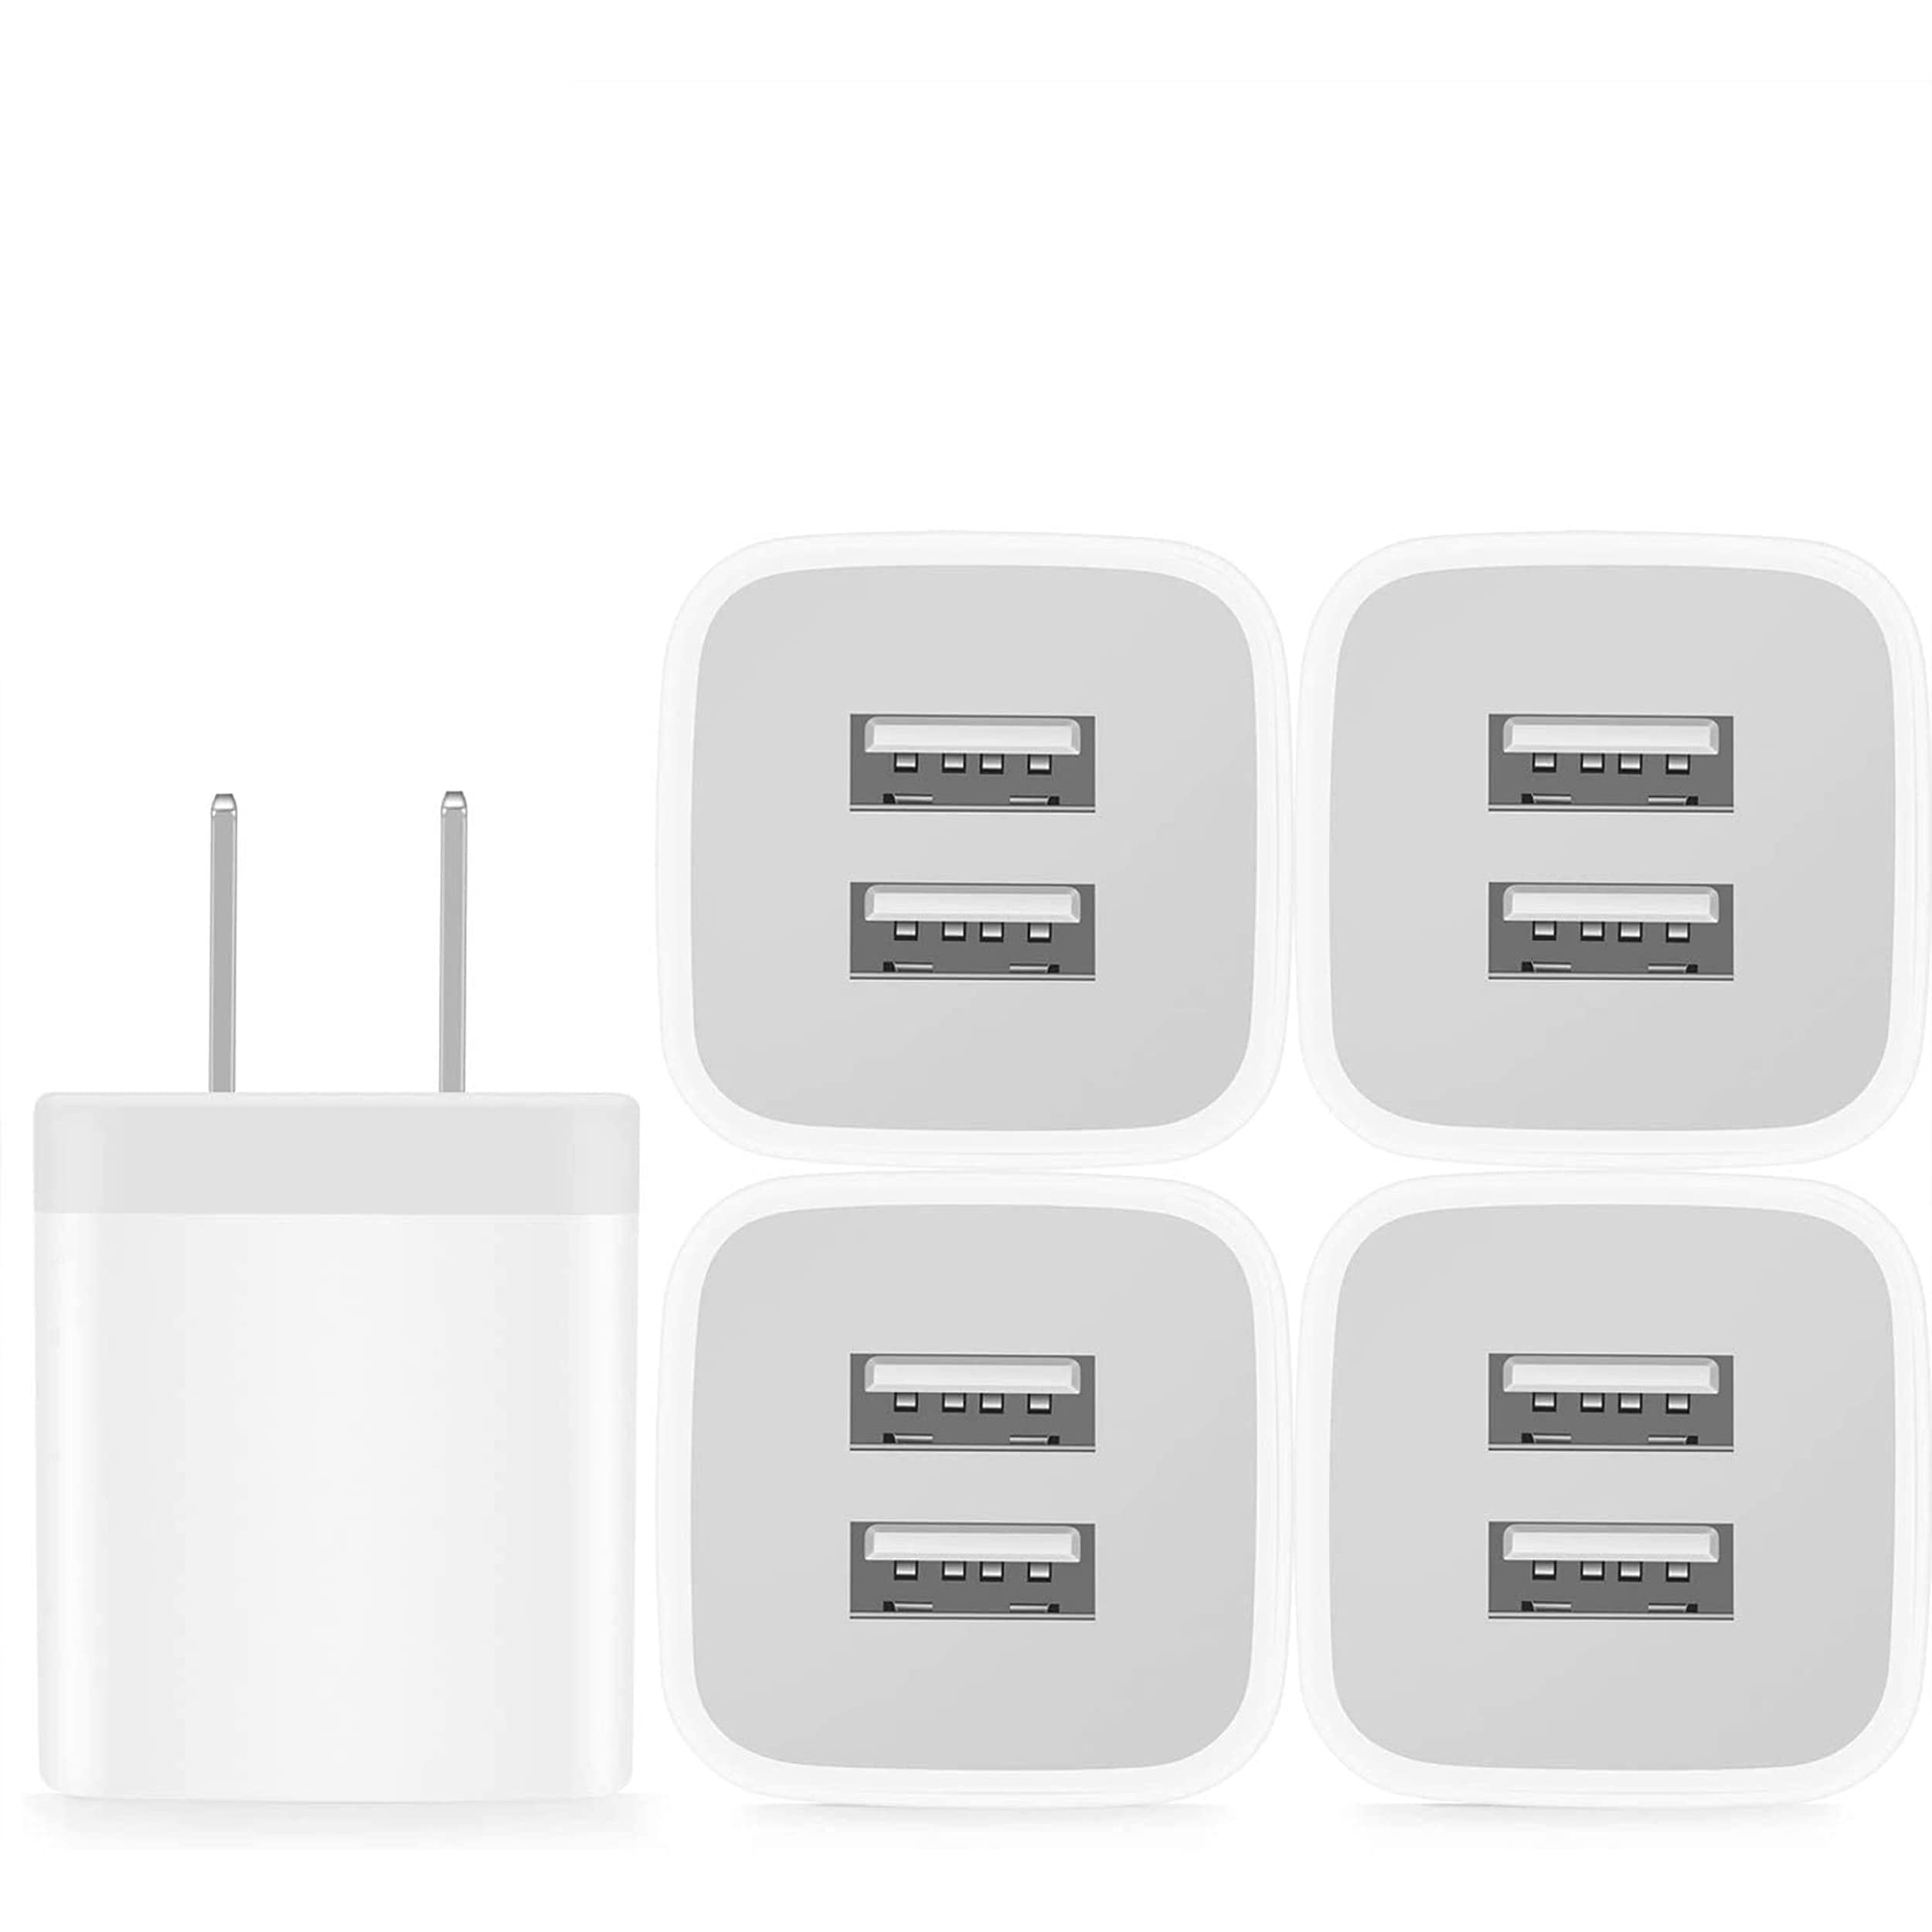 Book Cover USB Wall Charger, Power-7 5-Pack 2.1Amp Dual Port USB Cube Power Adapter Charger Plug Block Charging Box Brick for iPhone SE 11 Pro Max XS XR X 8 7 6S 6 Plus, Samsung, LG, Moto, Android Phones